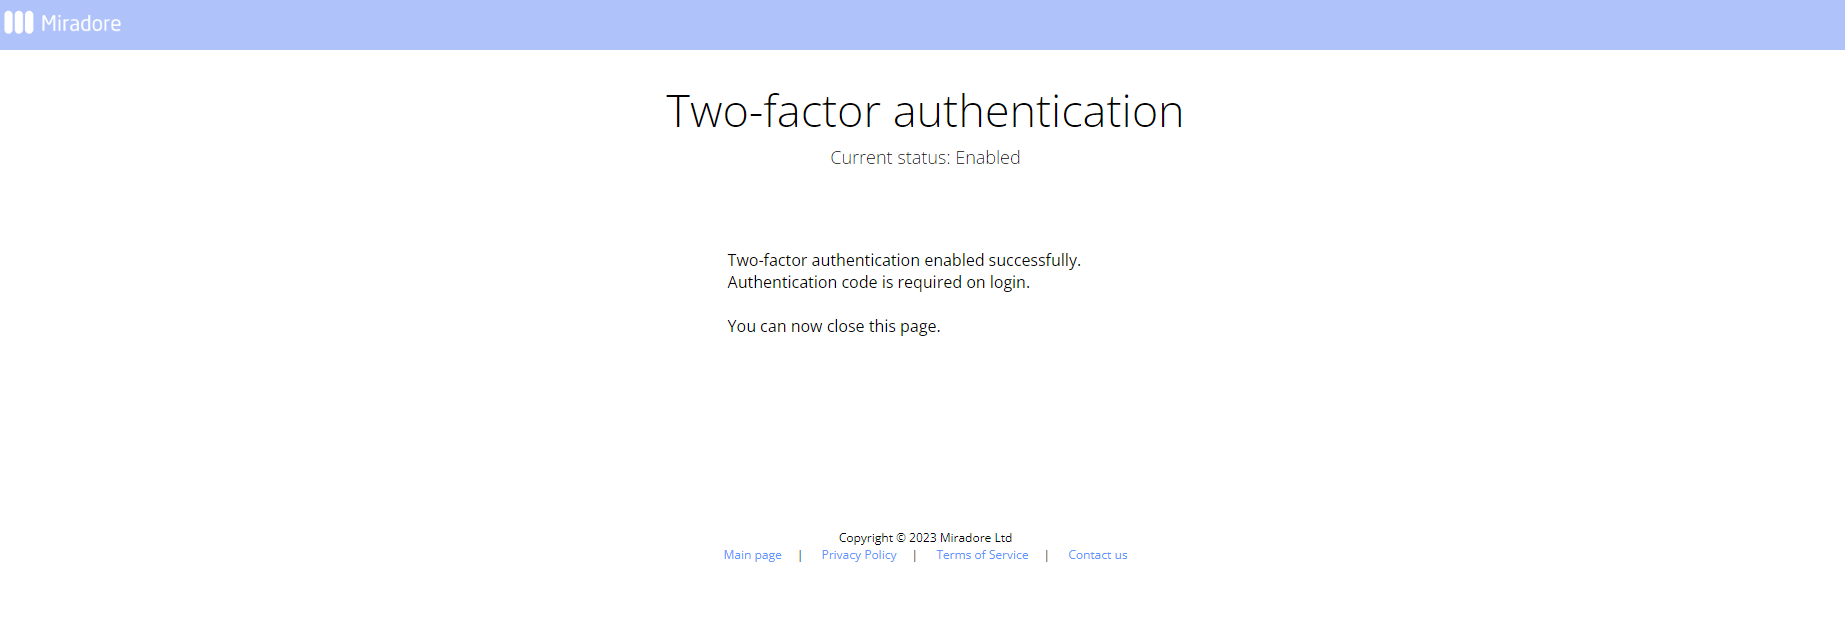 Two-factor authentication enabled in Miradore.